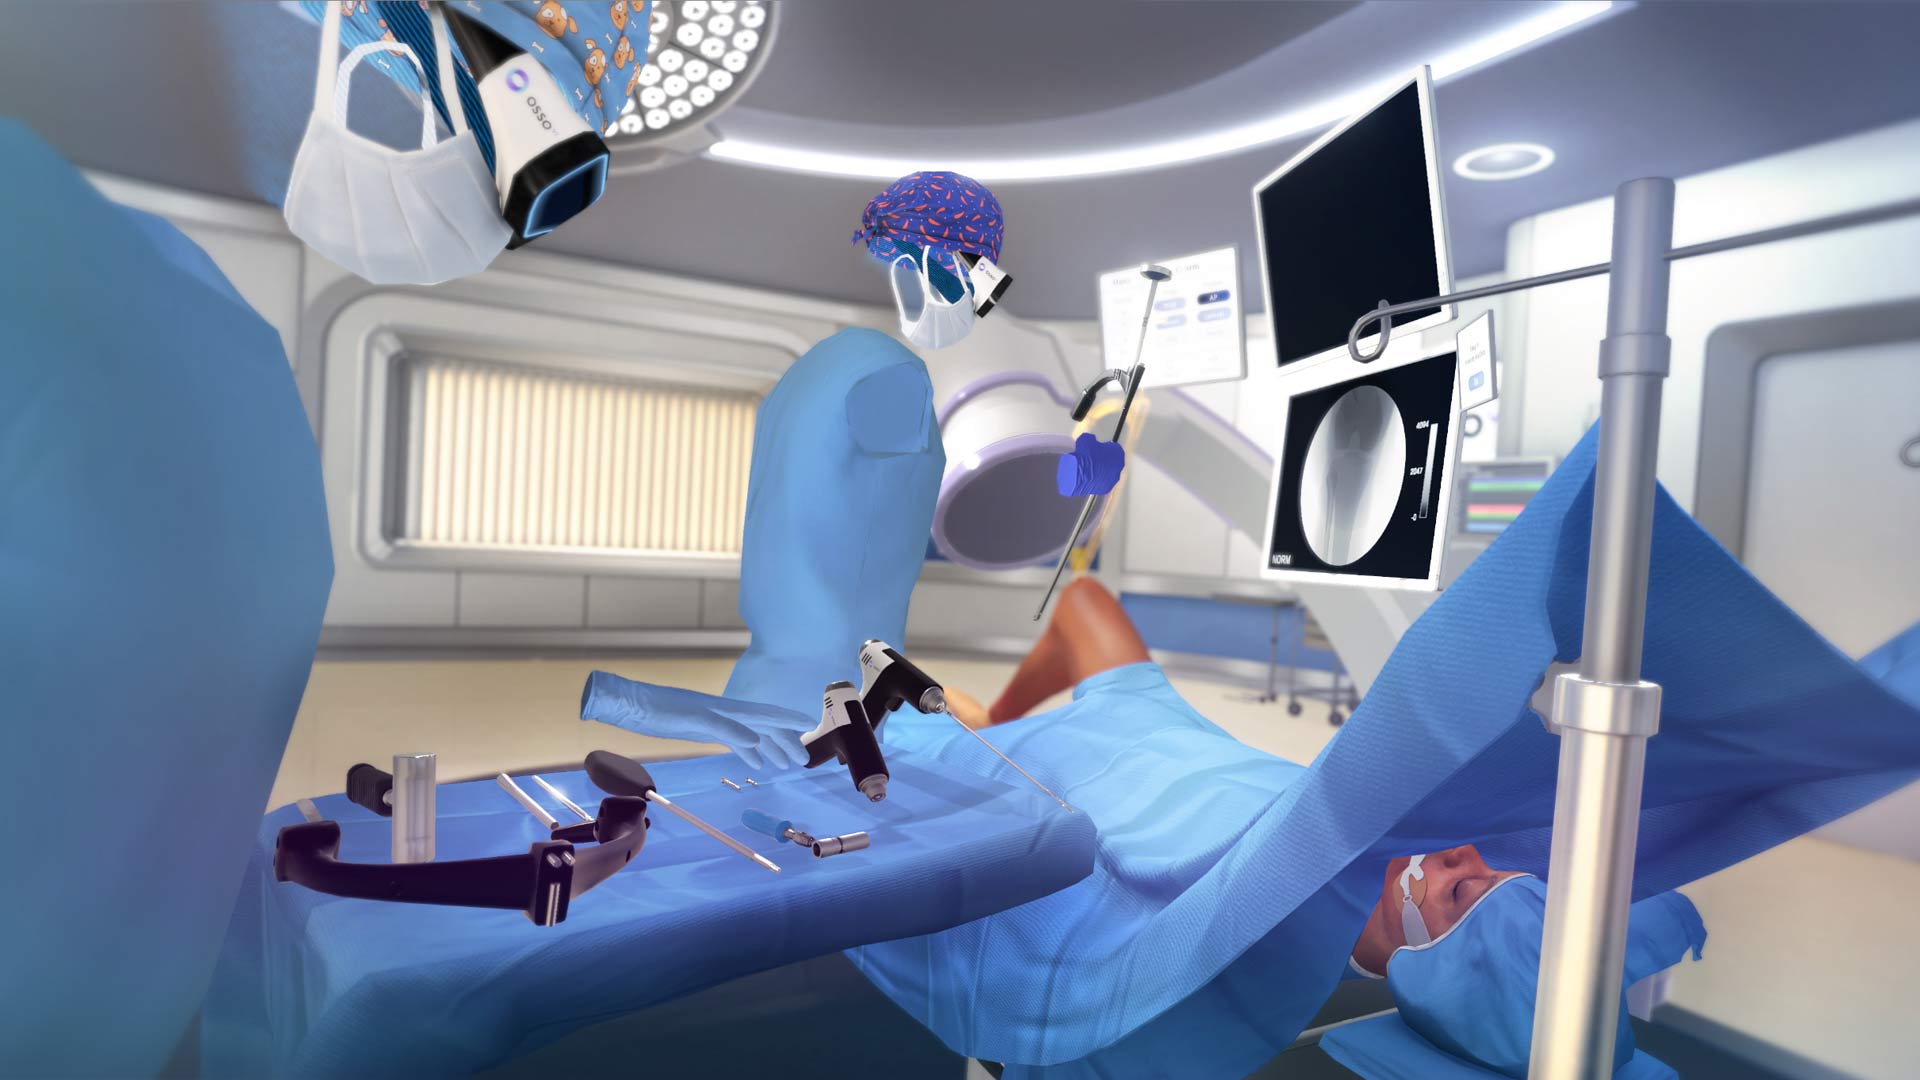 Surgicaltreatment Training Platform ‘Osso VR’ Secures $66M Series C Financing